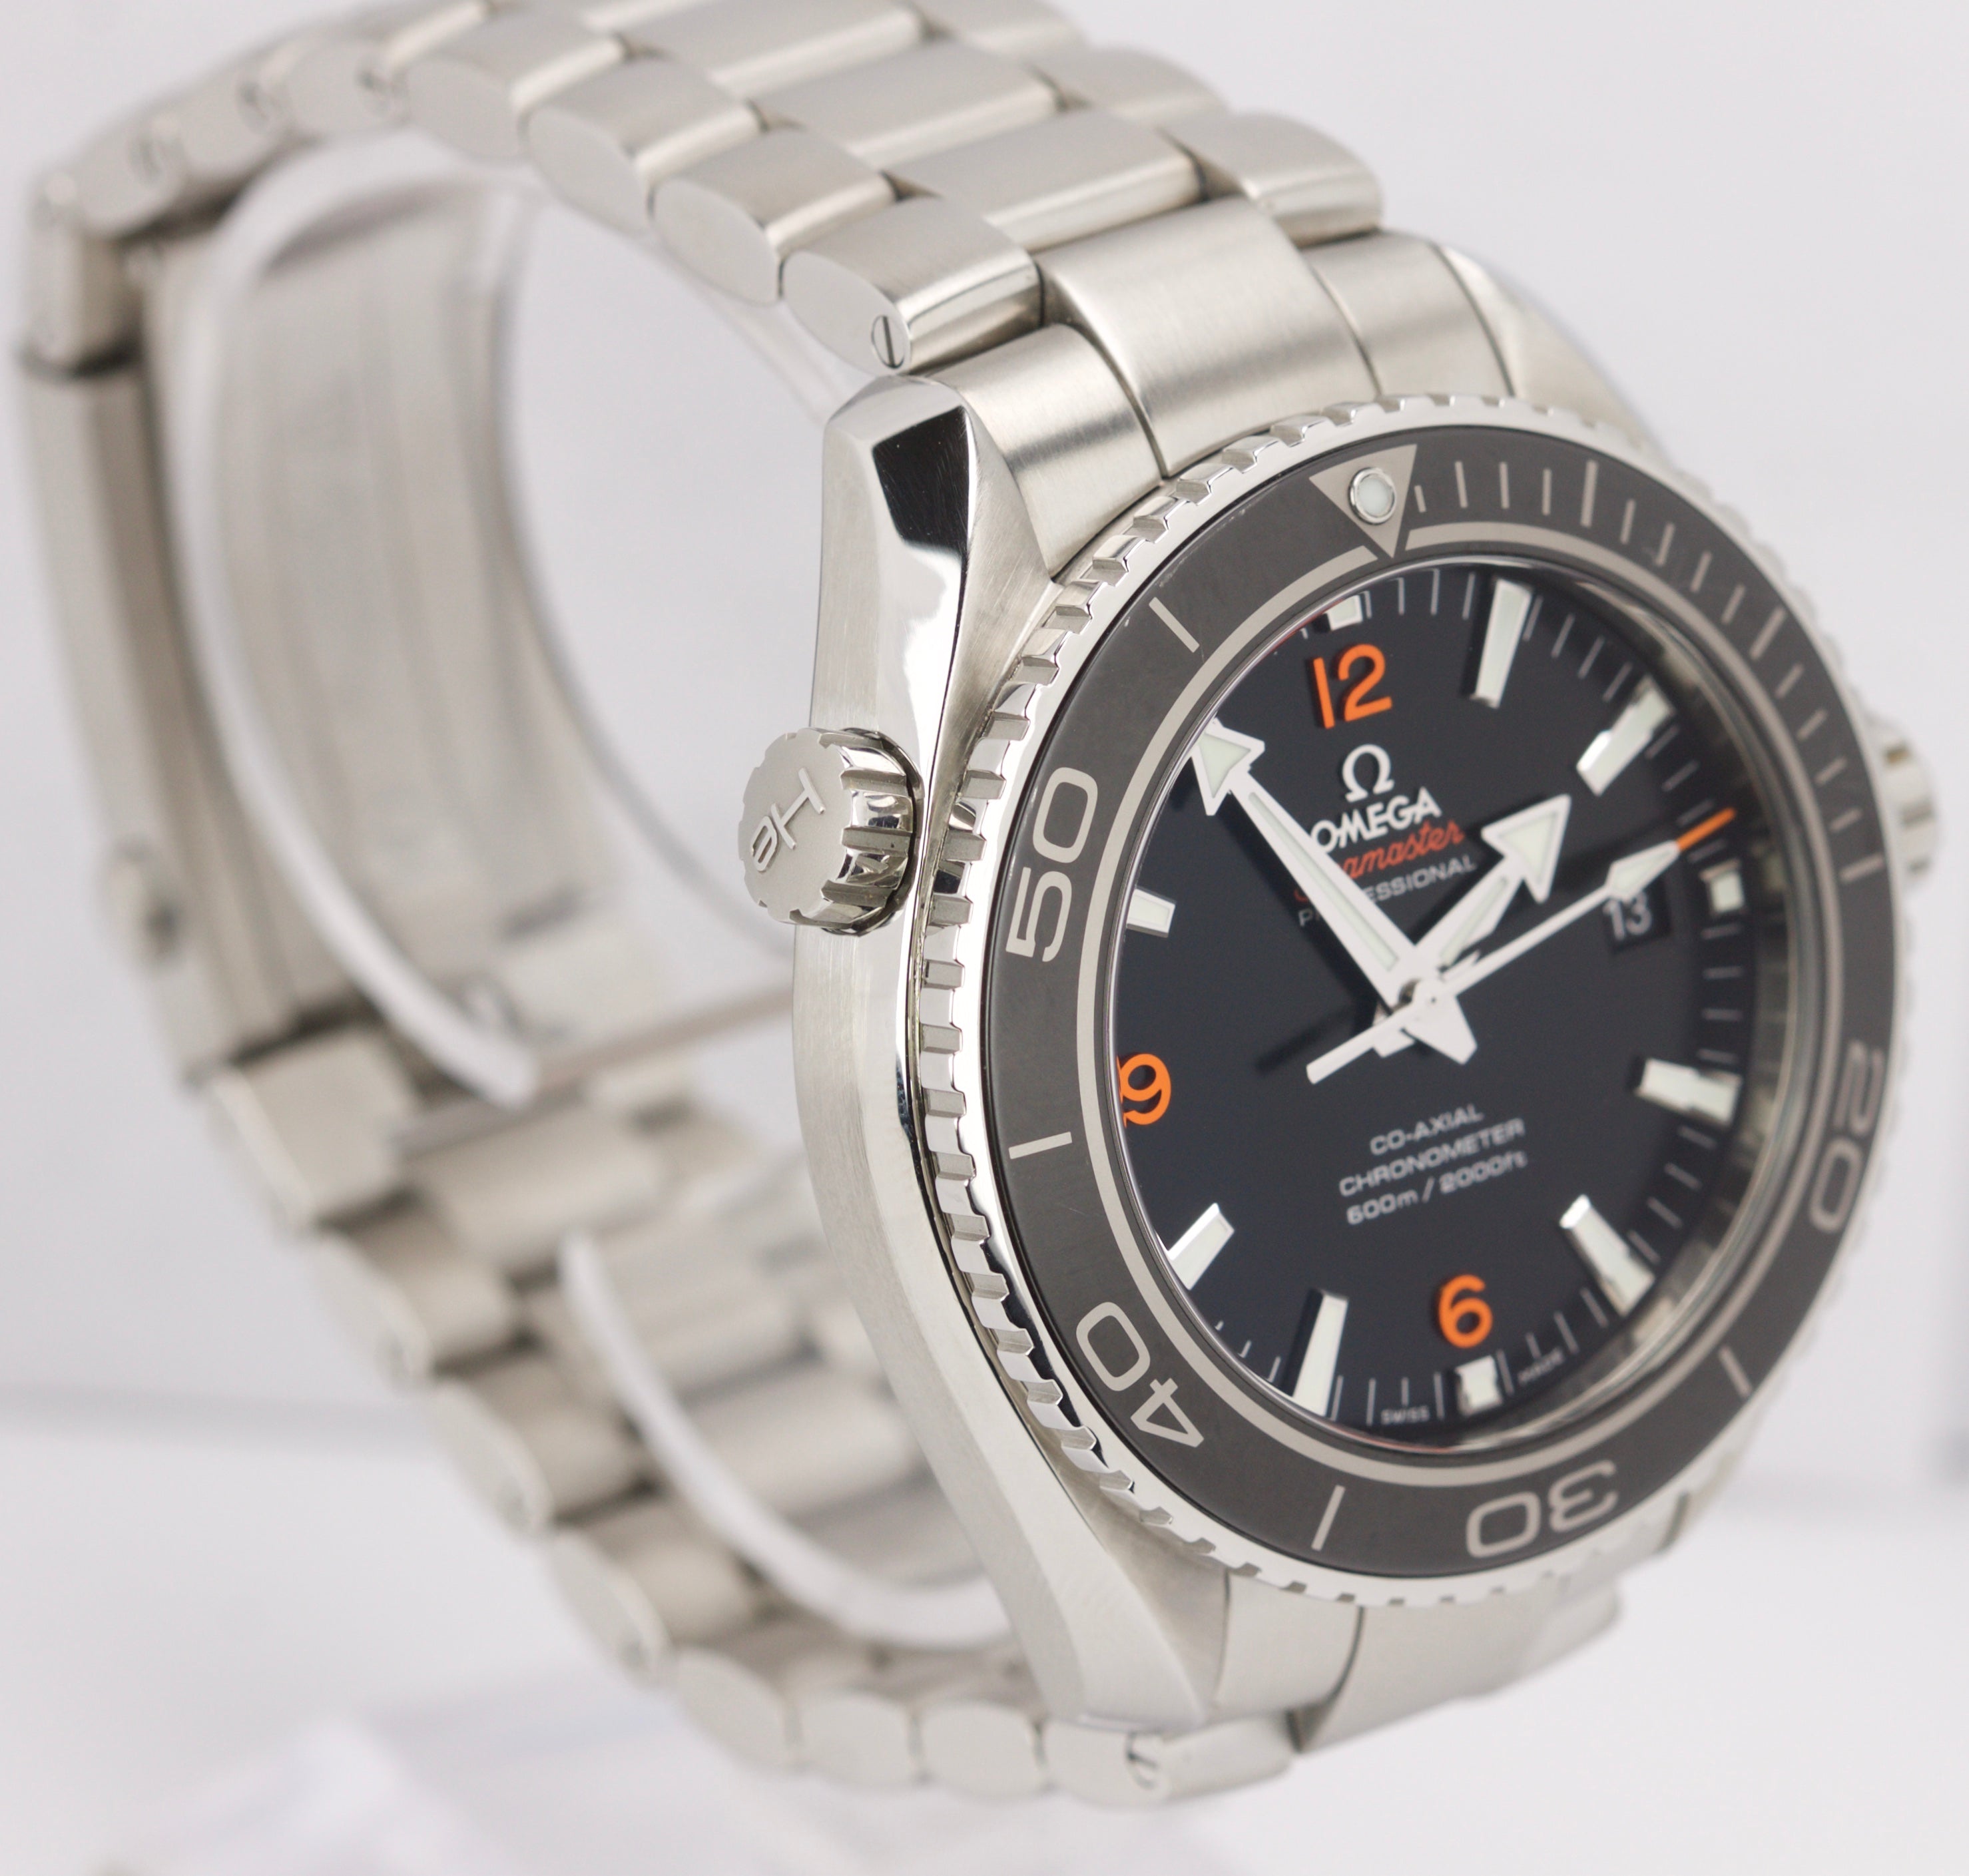 MINT Omega Seamaster Planet Ocean Black 45.5mm Co-Axial 600M 232.30.46.21.01.003